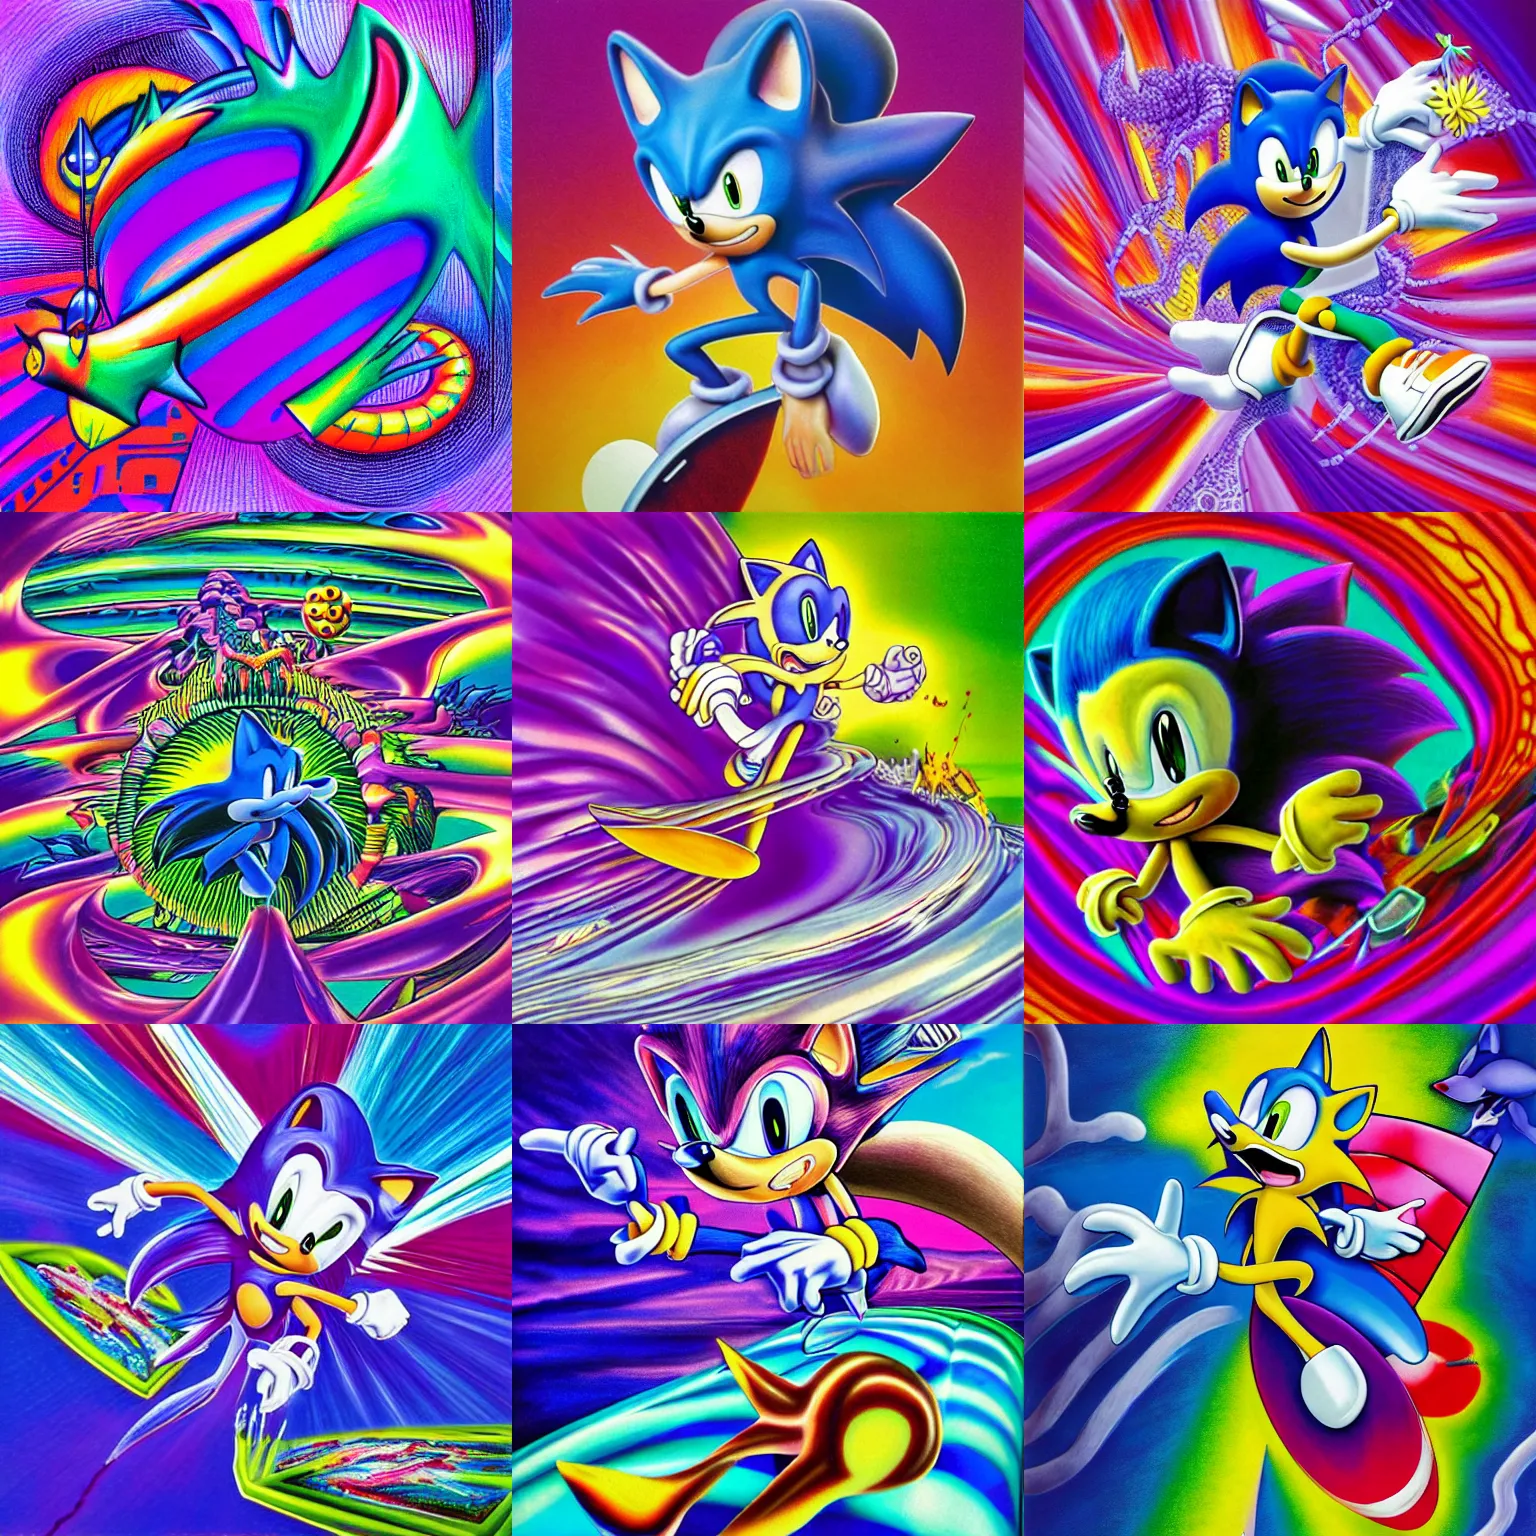 Prompt: surreal, sharp, detailed professional, soft pastels, high quality airbrush art album cover of a liquid dissolving airbrush art lsd dmt sonic the hedgehog surfing through cyberspace, purple checkerboard background, 1 9 9 0 s 1 9 9 2 sega genesis video game album cover